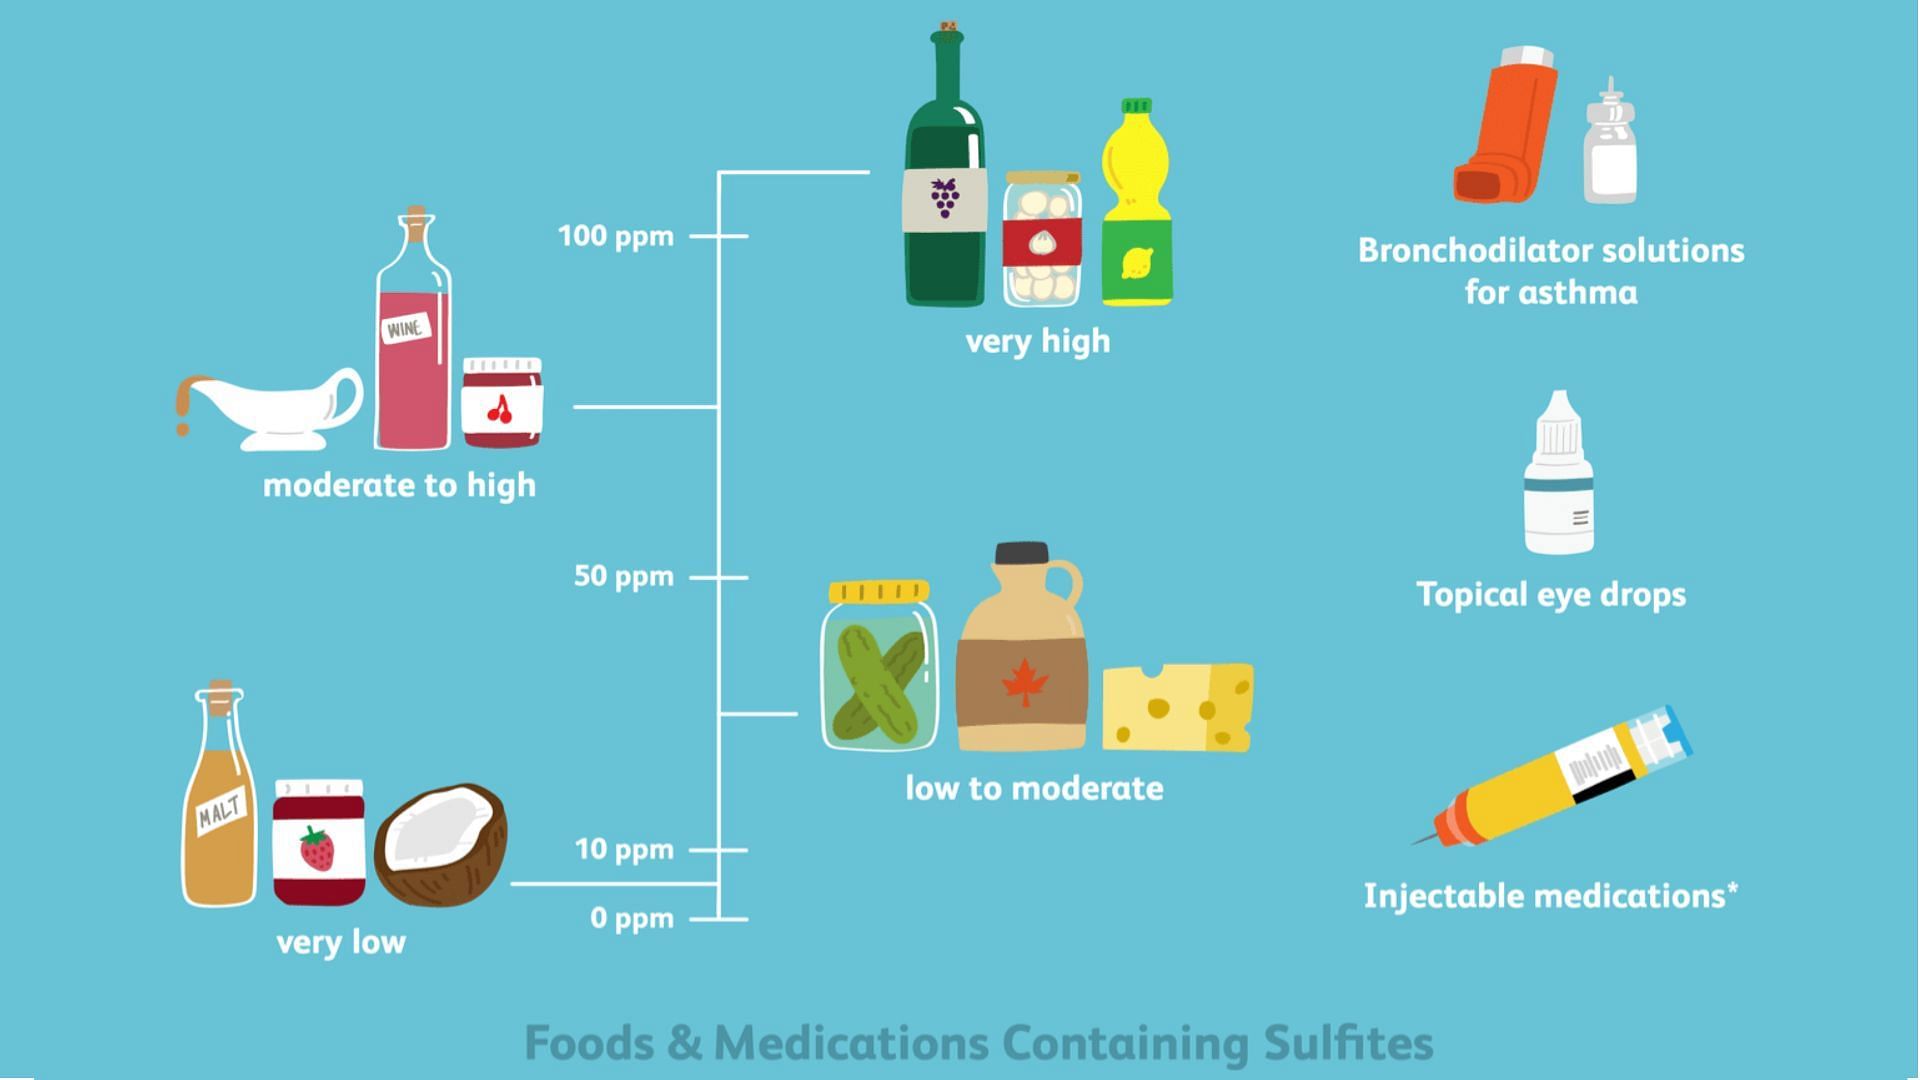 Sulfite contents in different food products and medications (Image via VeryWell)